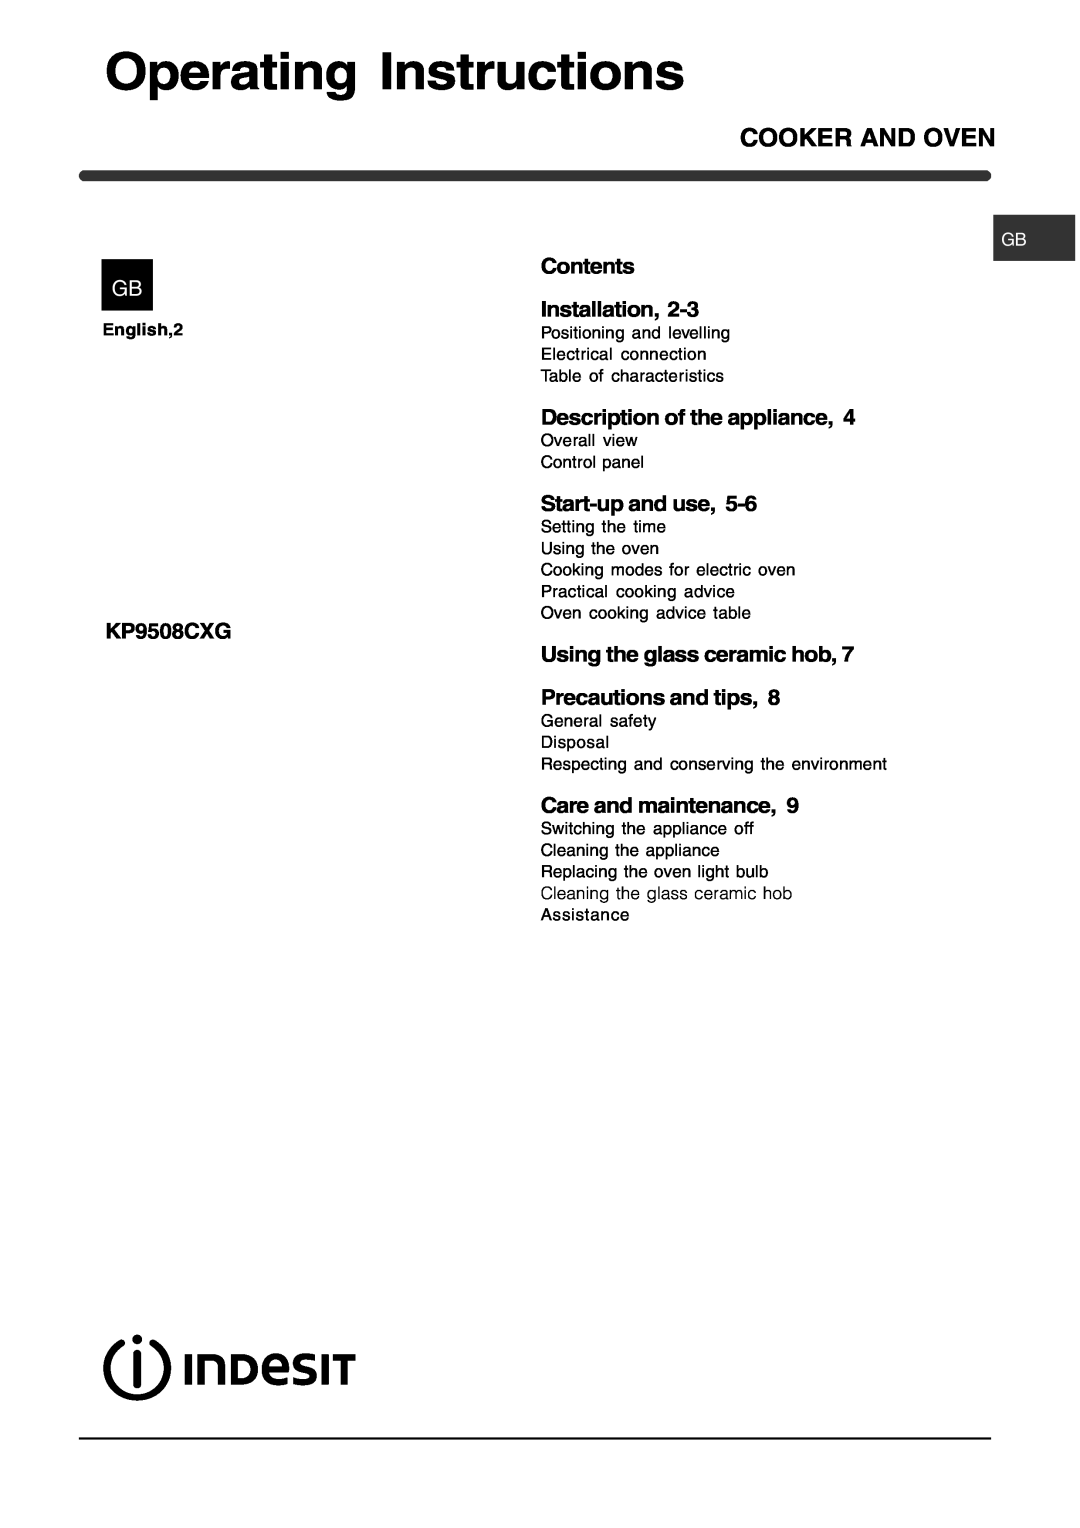 Indesit KP9508CXG manual Operating Instructions, Contents Installation, Description of the appliance, Start-up and use 